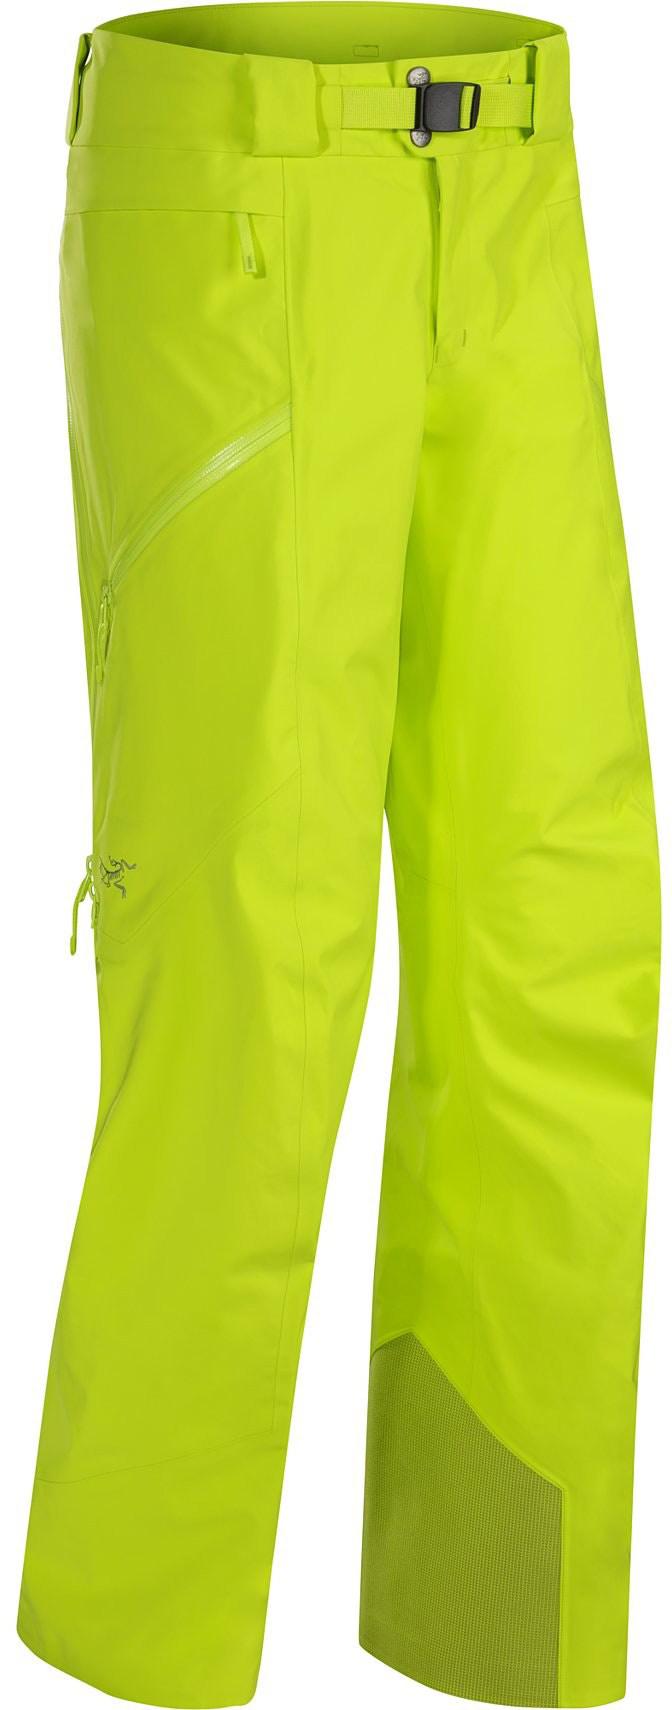 Pricing and assortment opportunities for skiwear | EDITED